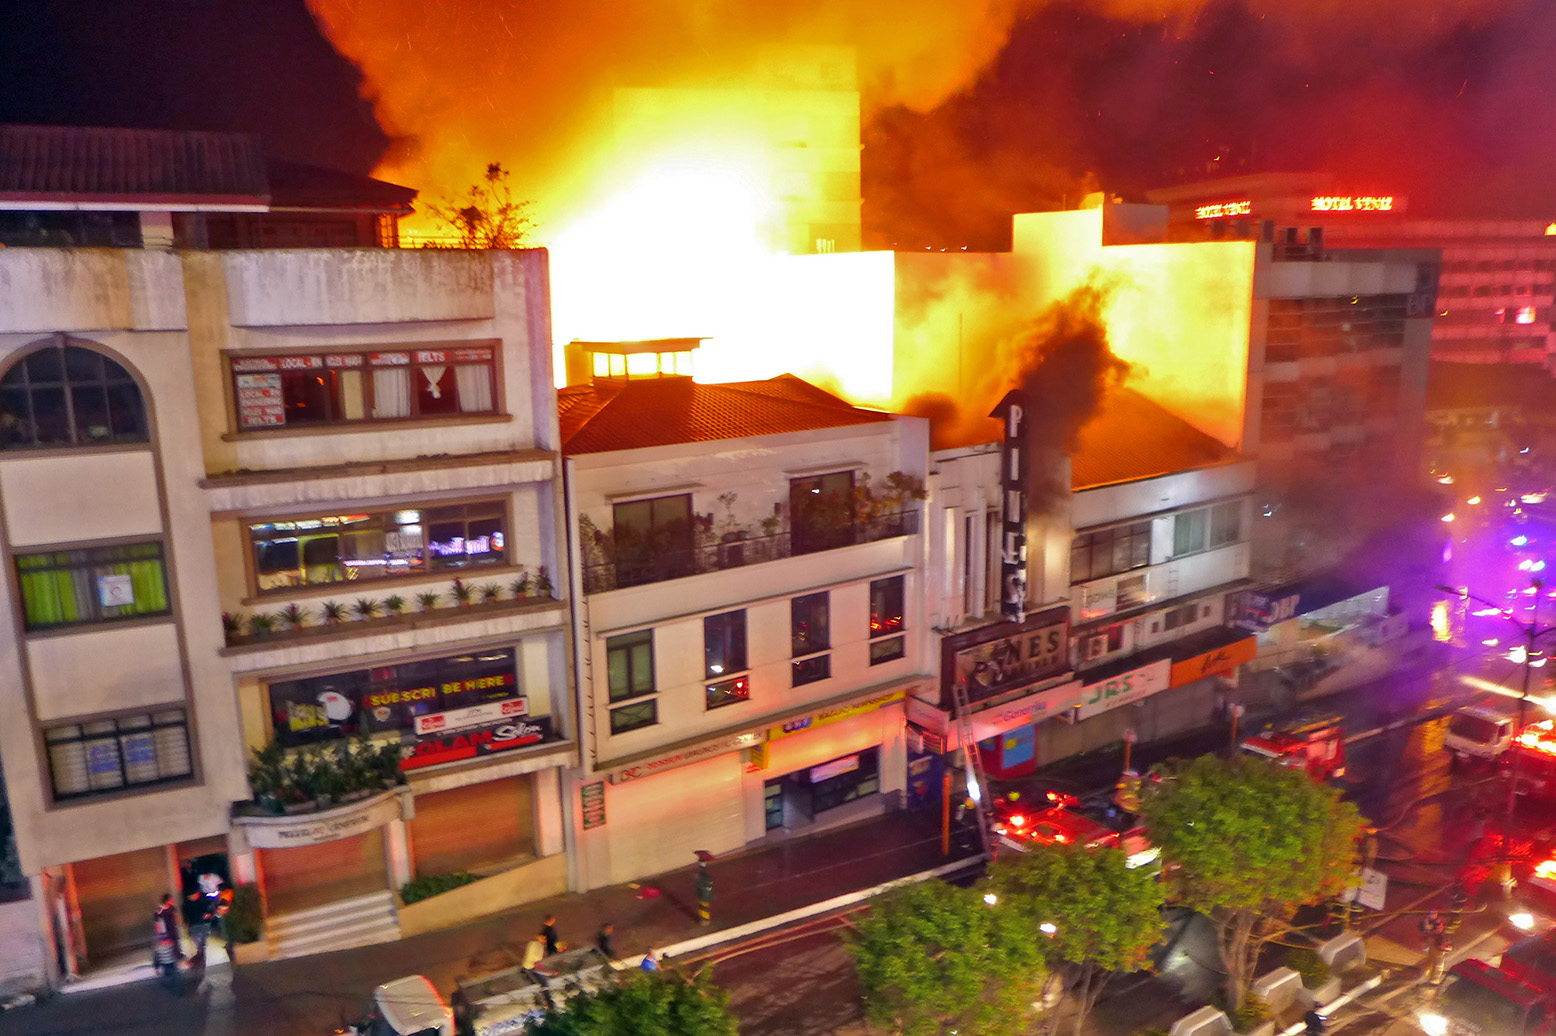 BLAZE. Authorities have yet to determine the cause of the fire that hit the Pines Arcade in Baguio on November 5, 2018. All photos by Mau Victa/Rappler 